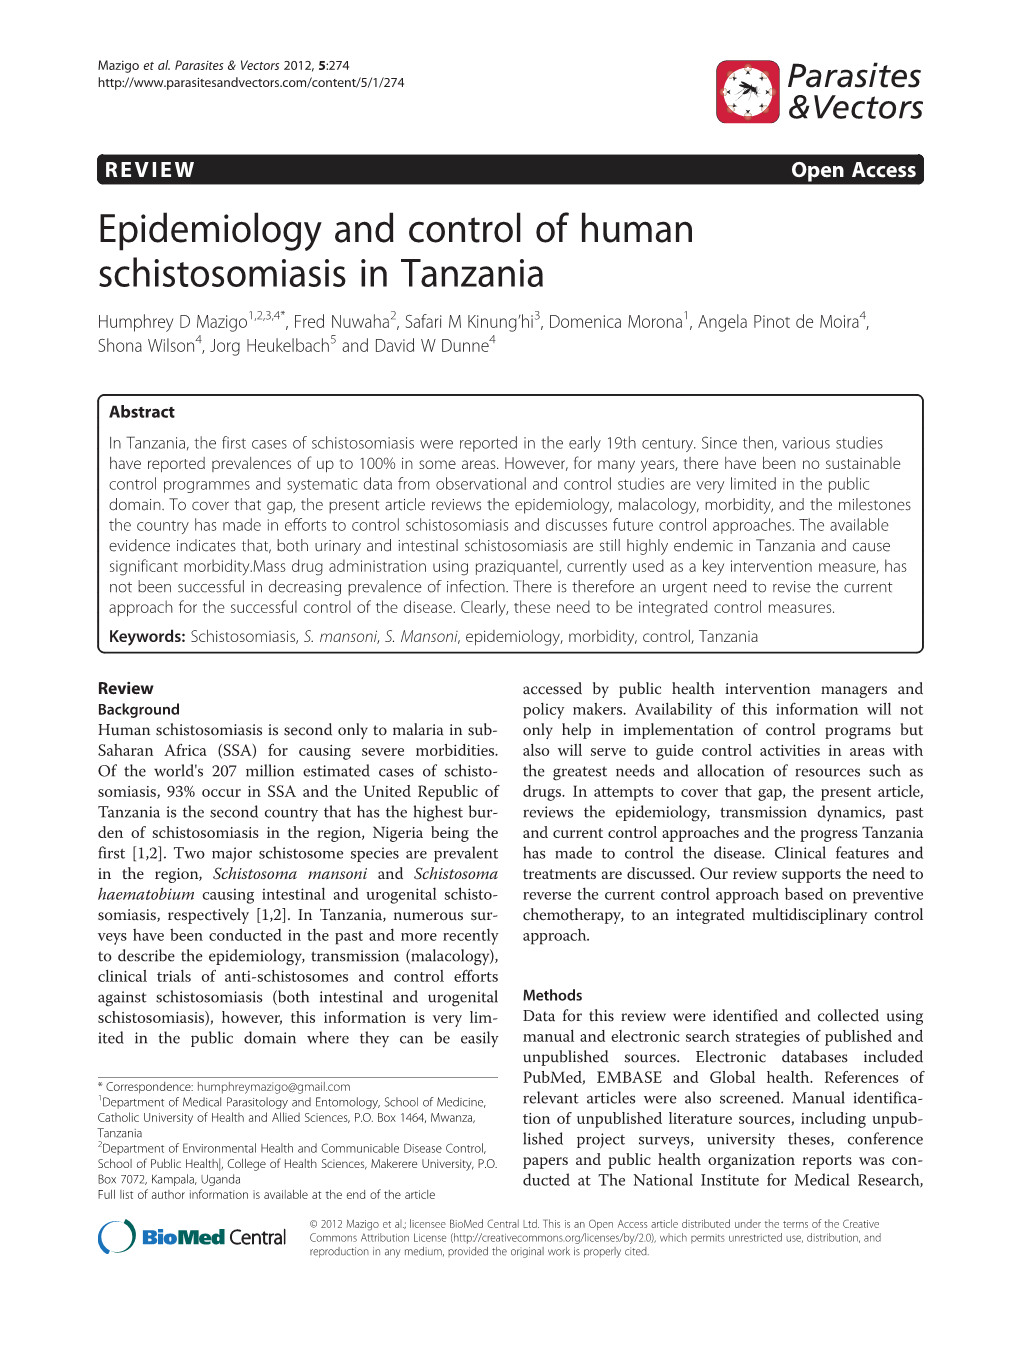 Epidemiology and Control of Human Schistosomiasis In